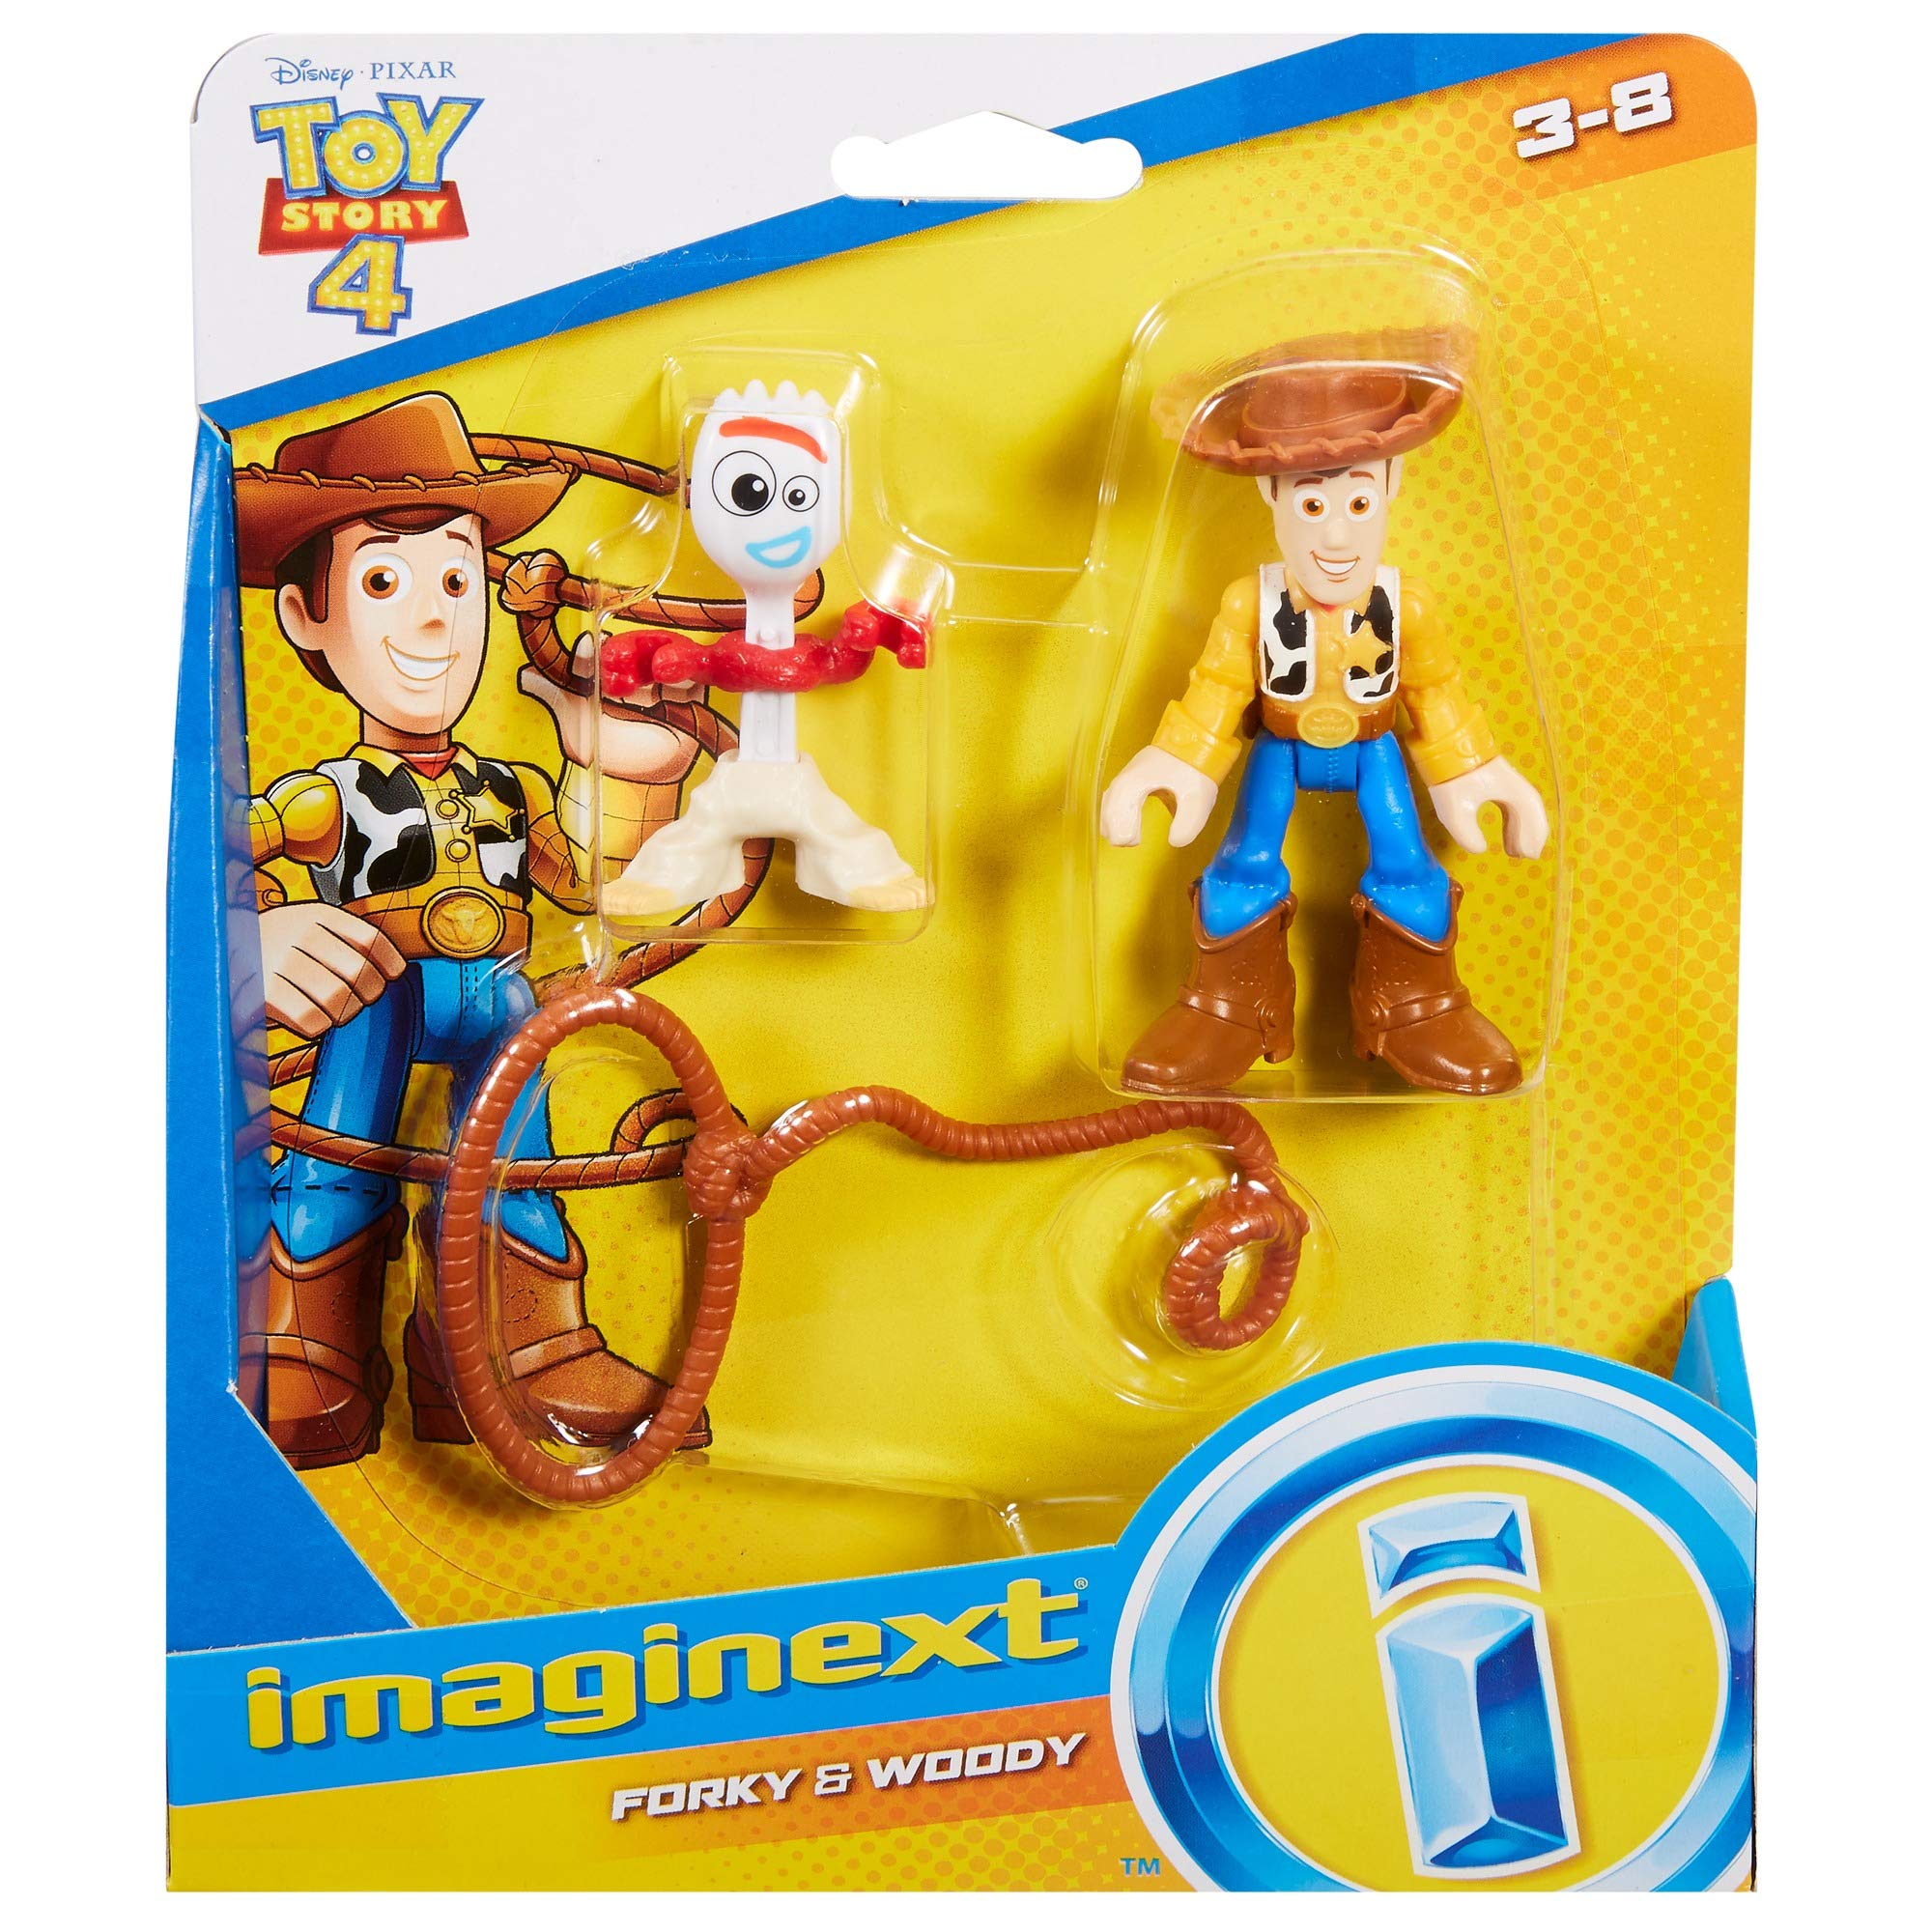 Fisher-Price Imaginext Disney Pixar Toy Story 4 Woody & Forky Figure 2-Pack